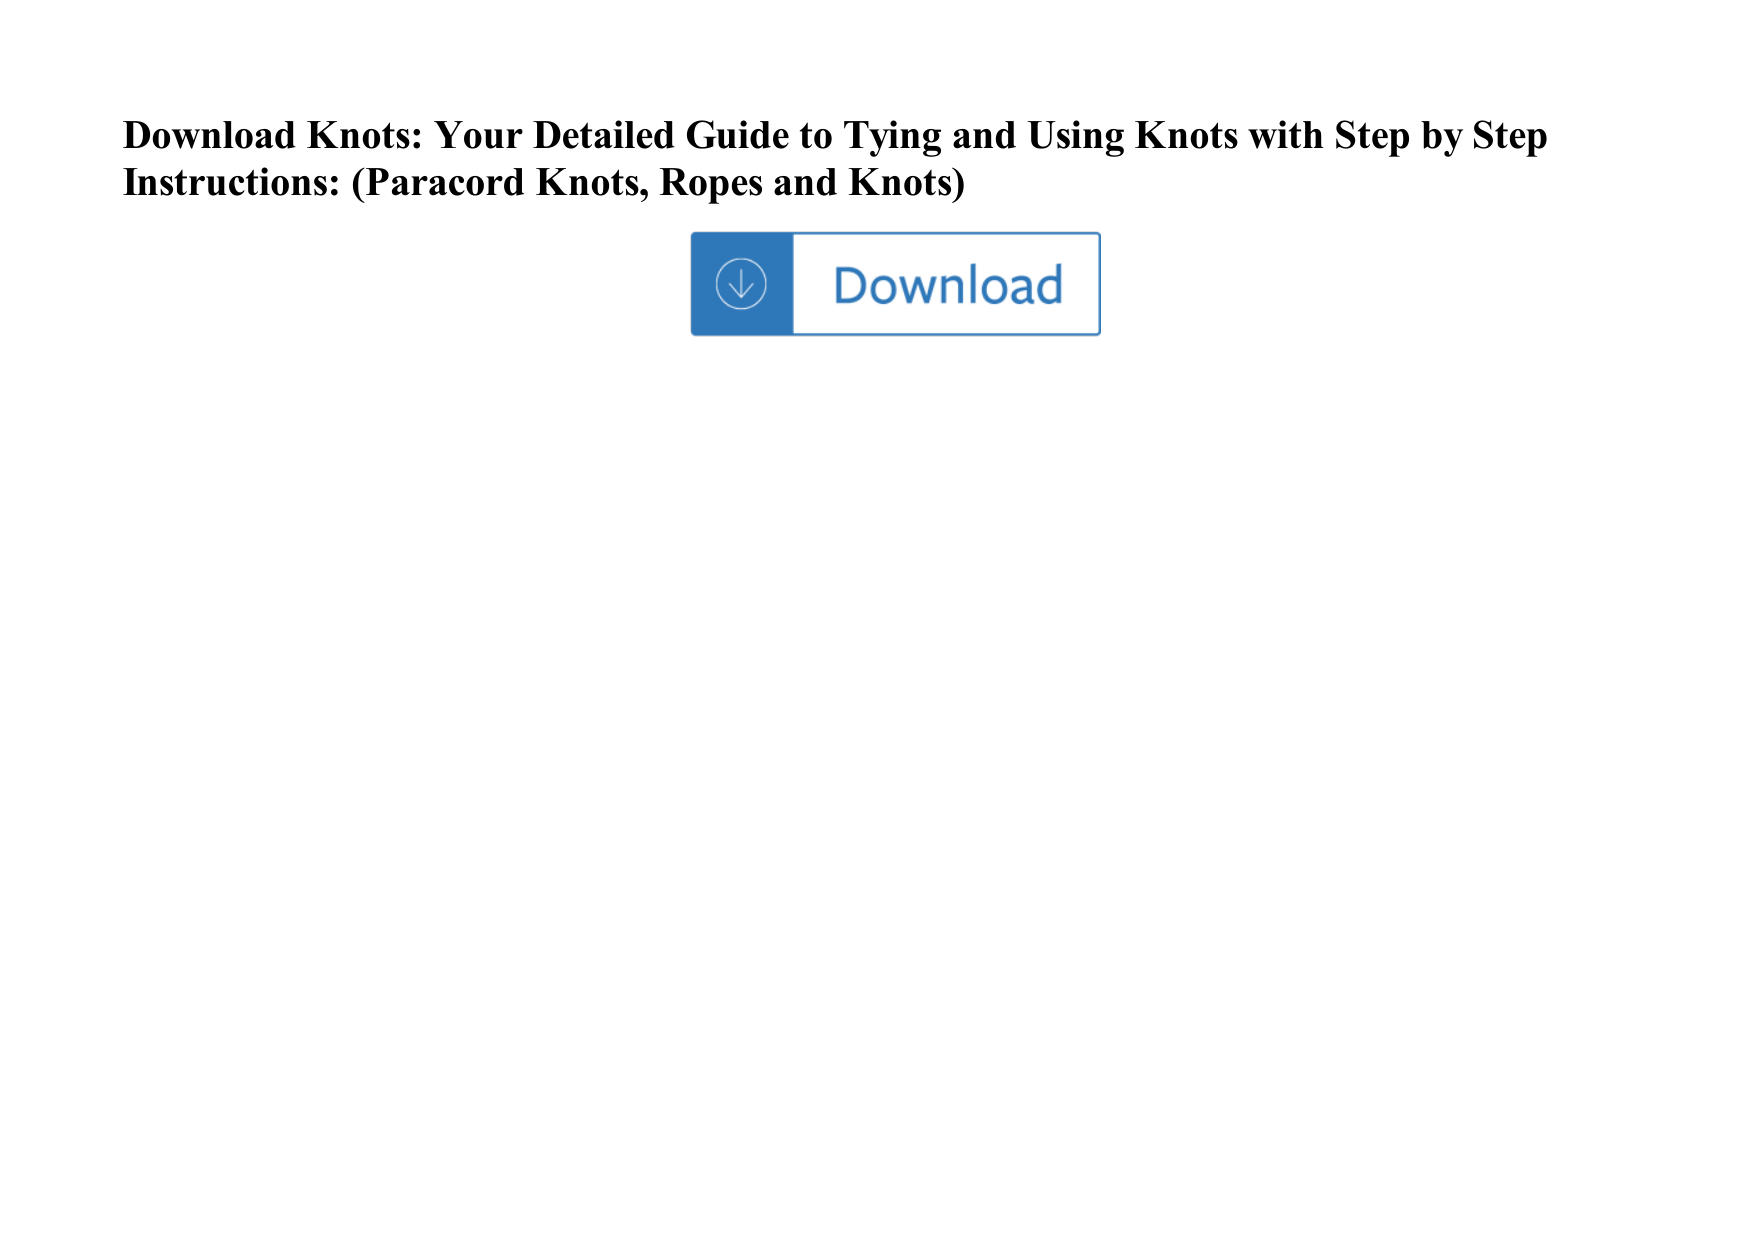 Page 1 of 1 - Knots: Your Detailed Guide To Tying And Using Knots With Step By Instructions: (Paracord Knots, Ropes Knots) Knots-your-detailed-guide-to-tying-and-using-knots-with-step-by-step-instructions-paracord-knots-ropes-and-knots